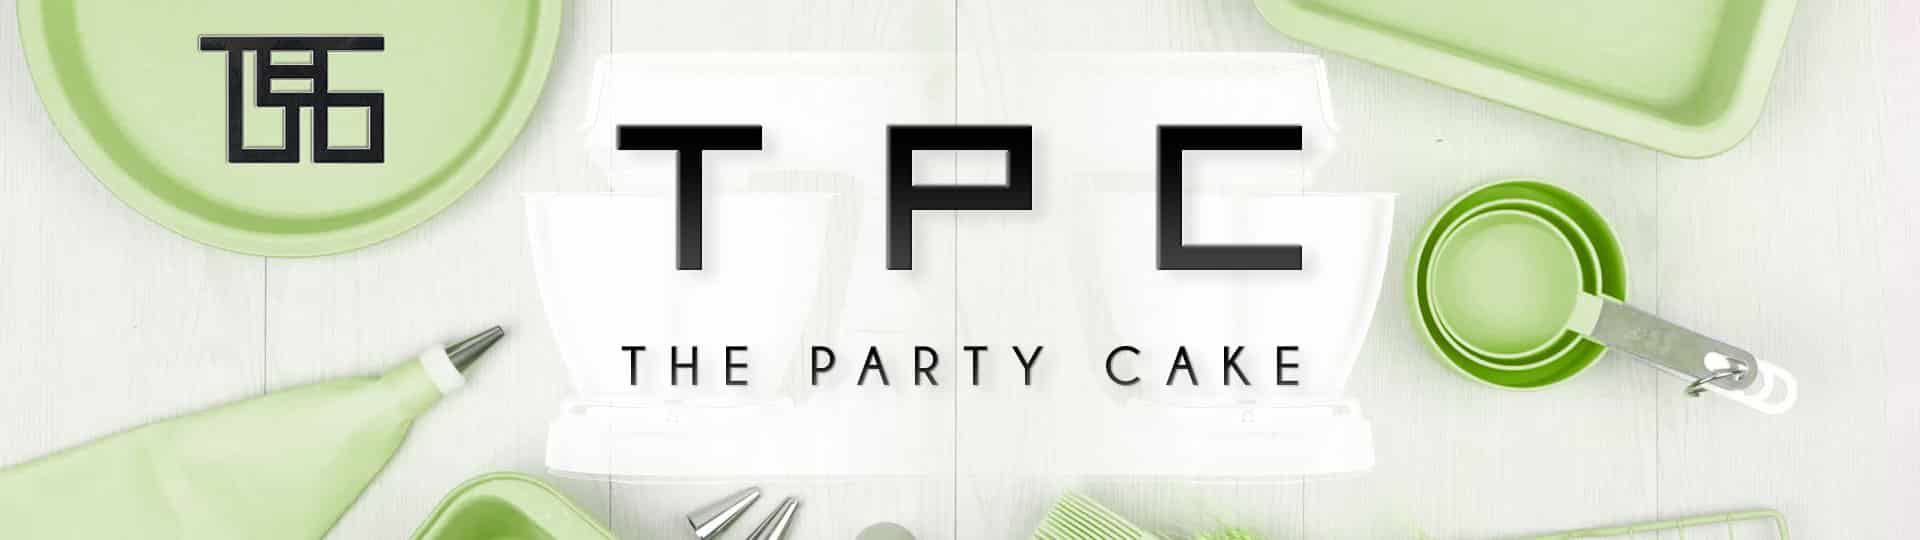 TPC - The Party Cake